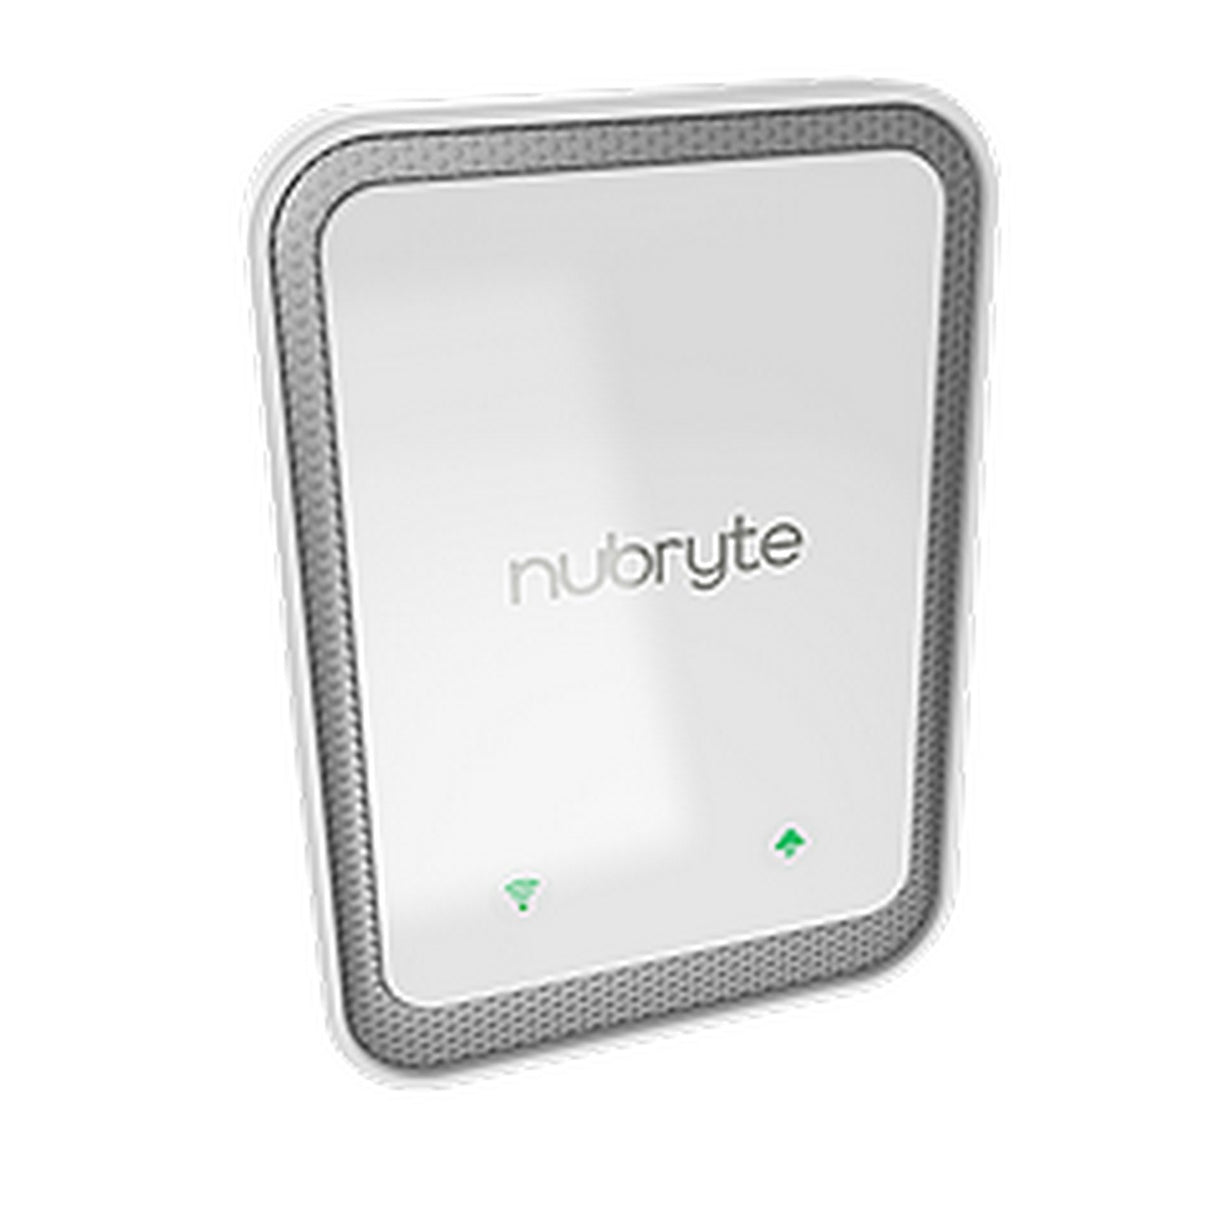 NuBryte Link | Home Automation Network Extending Device